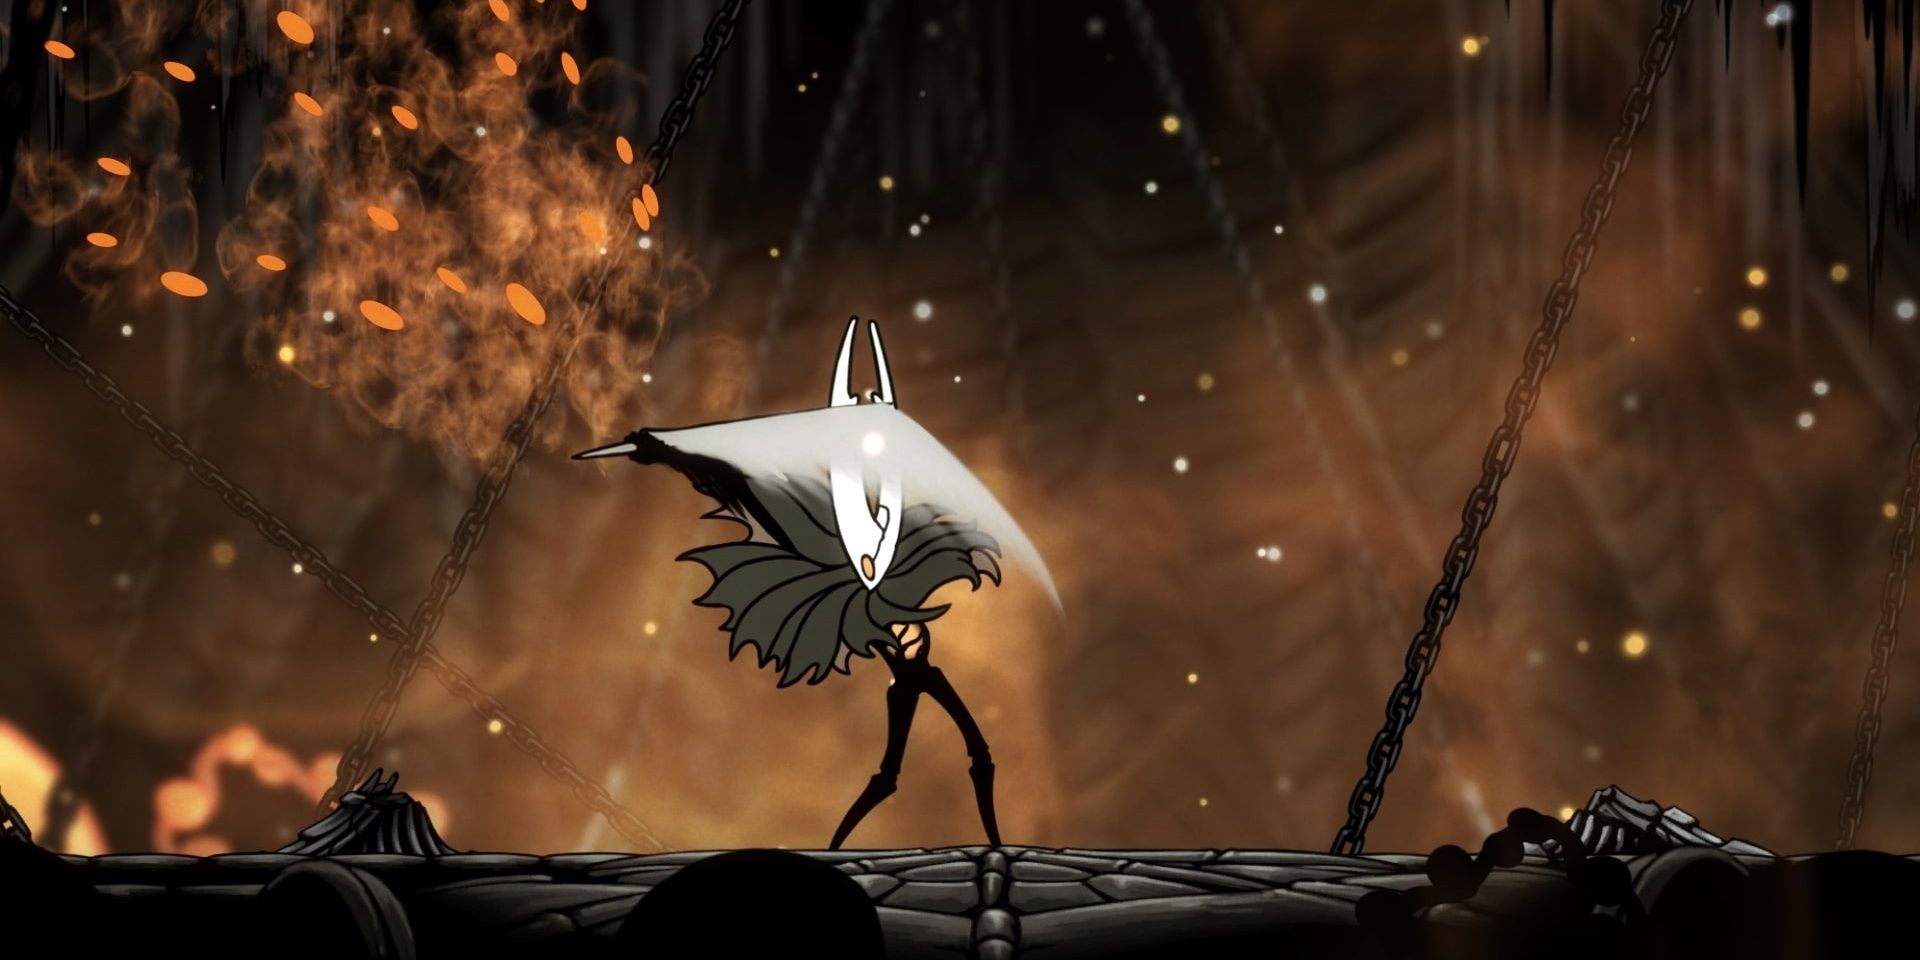 The Hollow Knight Stabbing Themself in the boss encounter in the Temple of the Black Egg